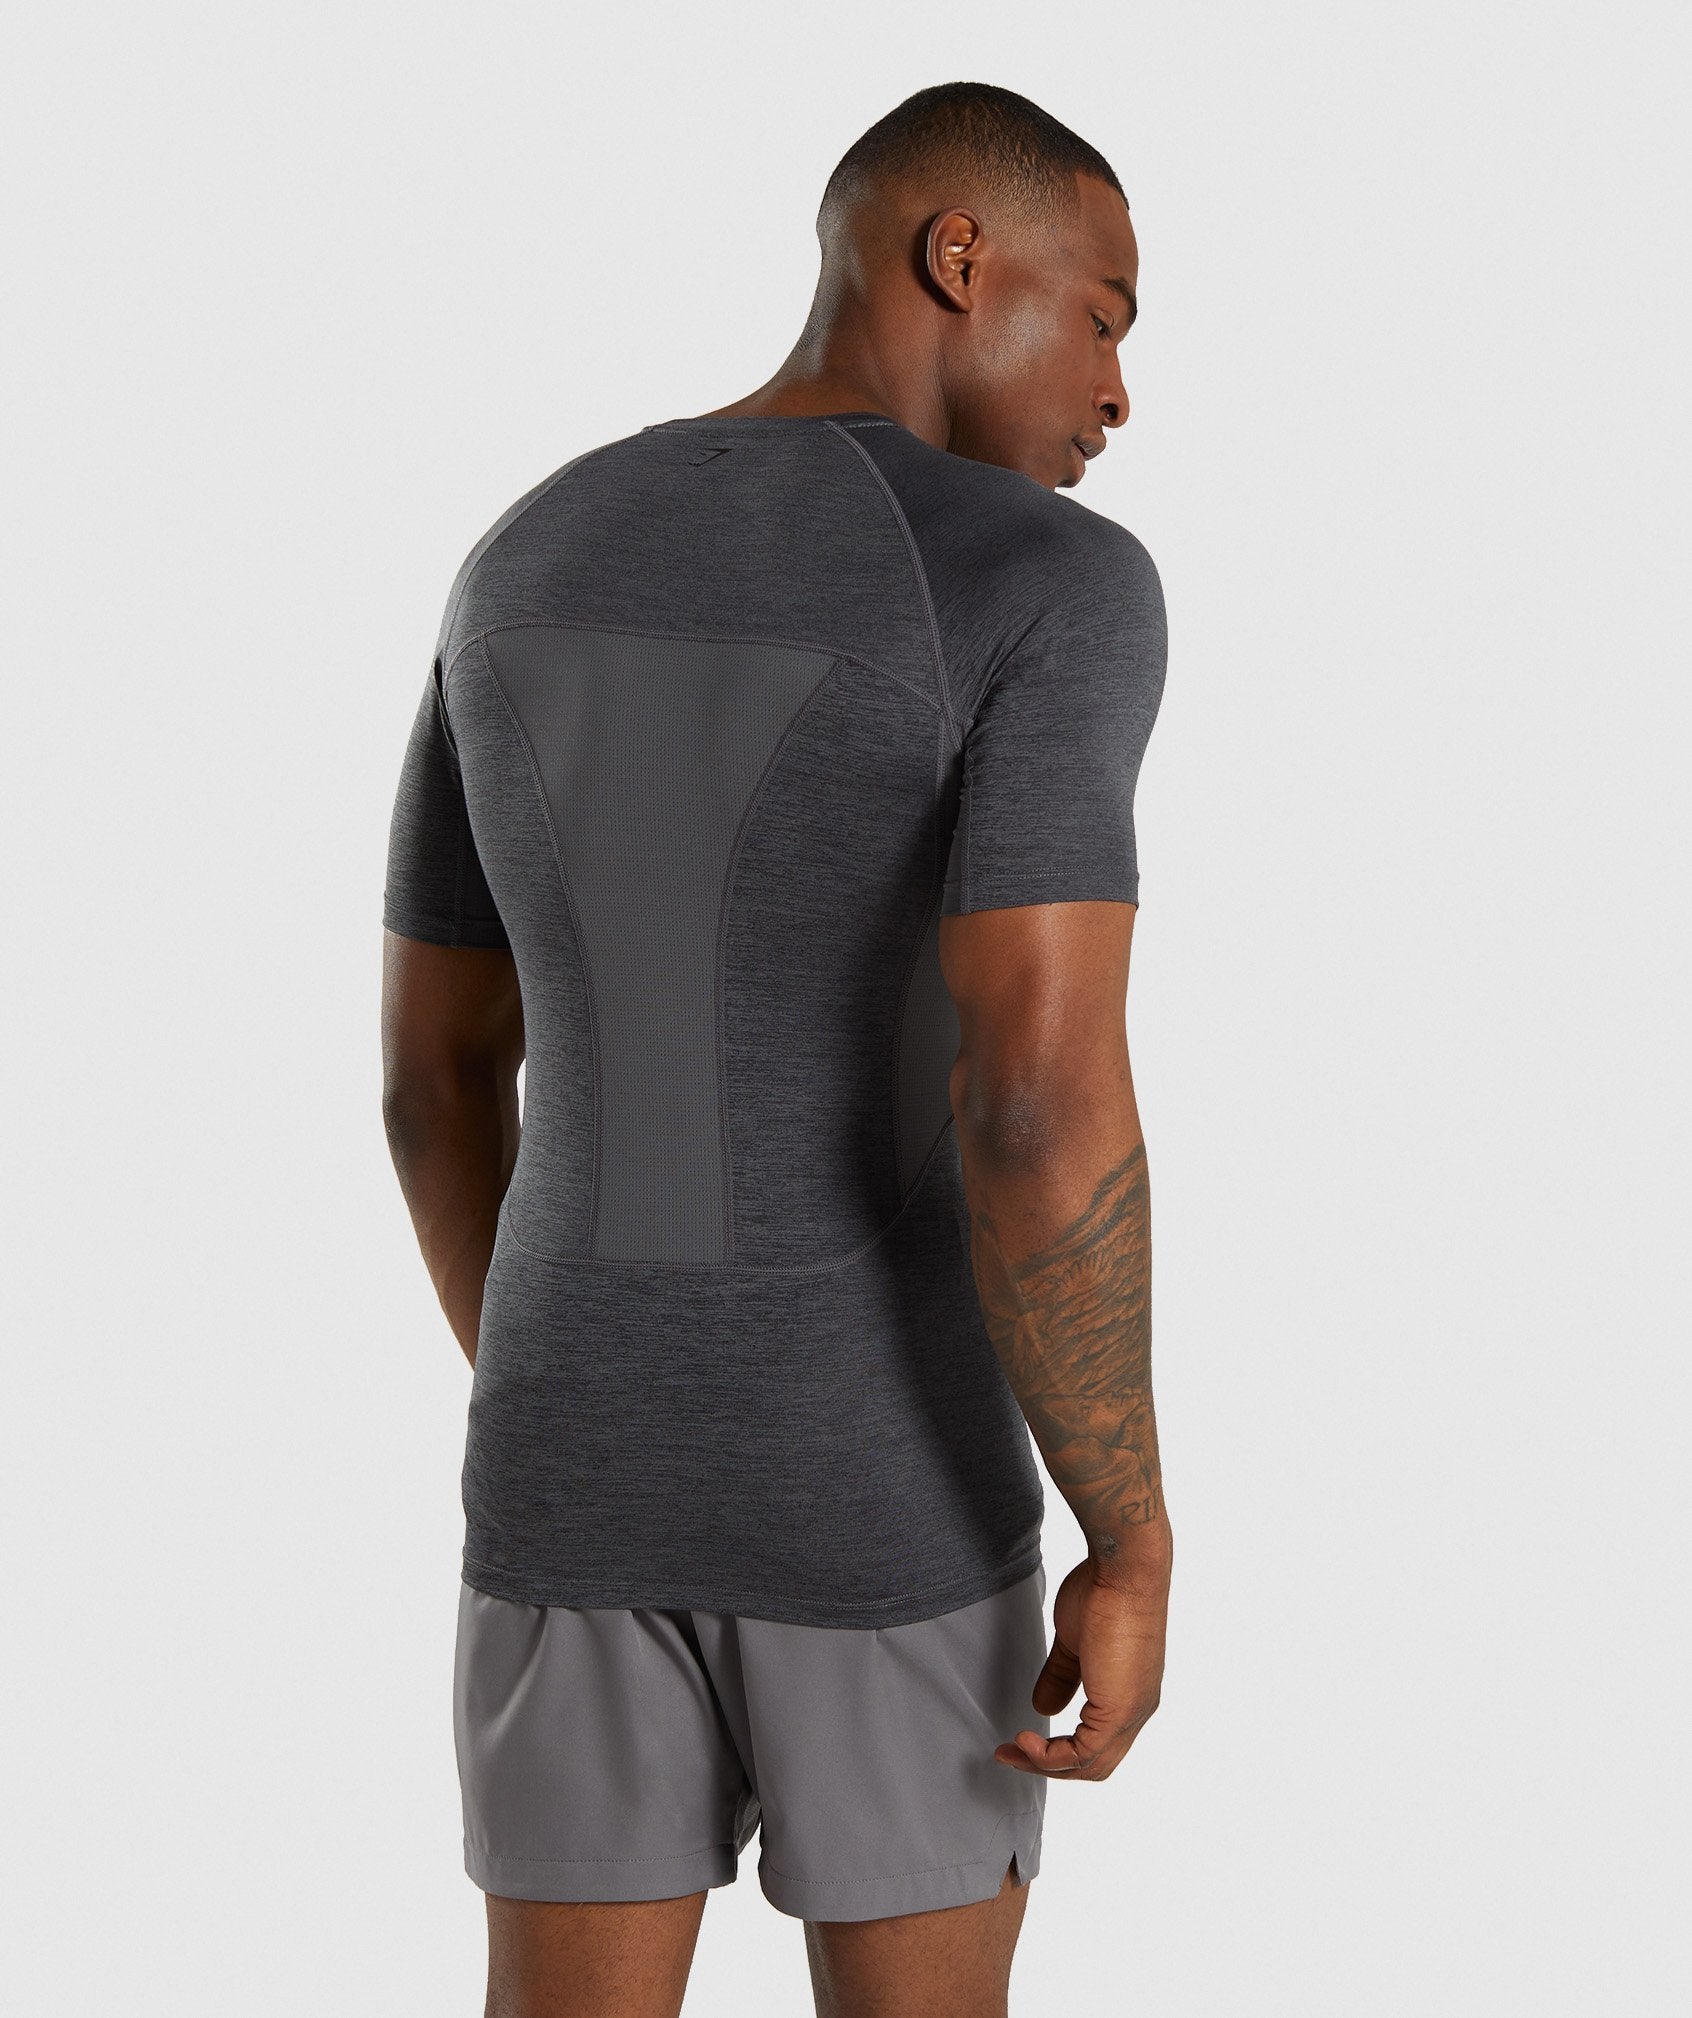 Element+ Baselayer T-Shirt in Black Marl - view 2